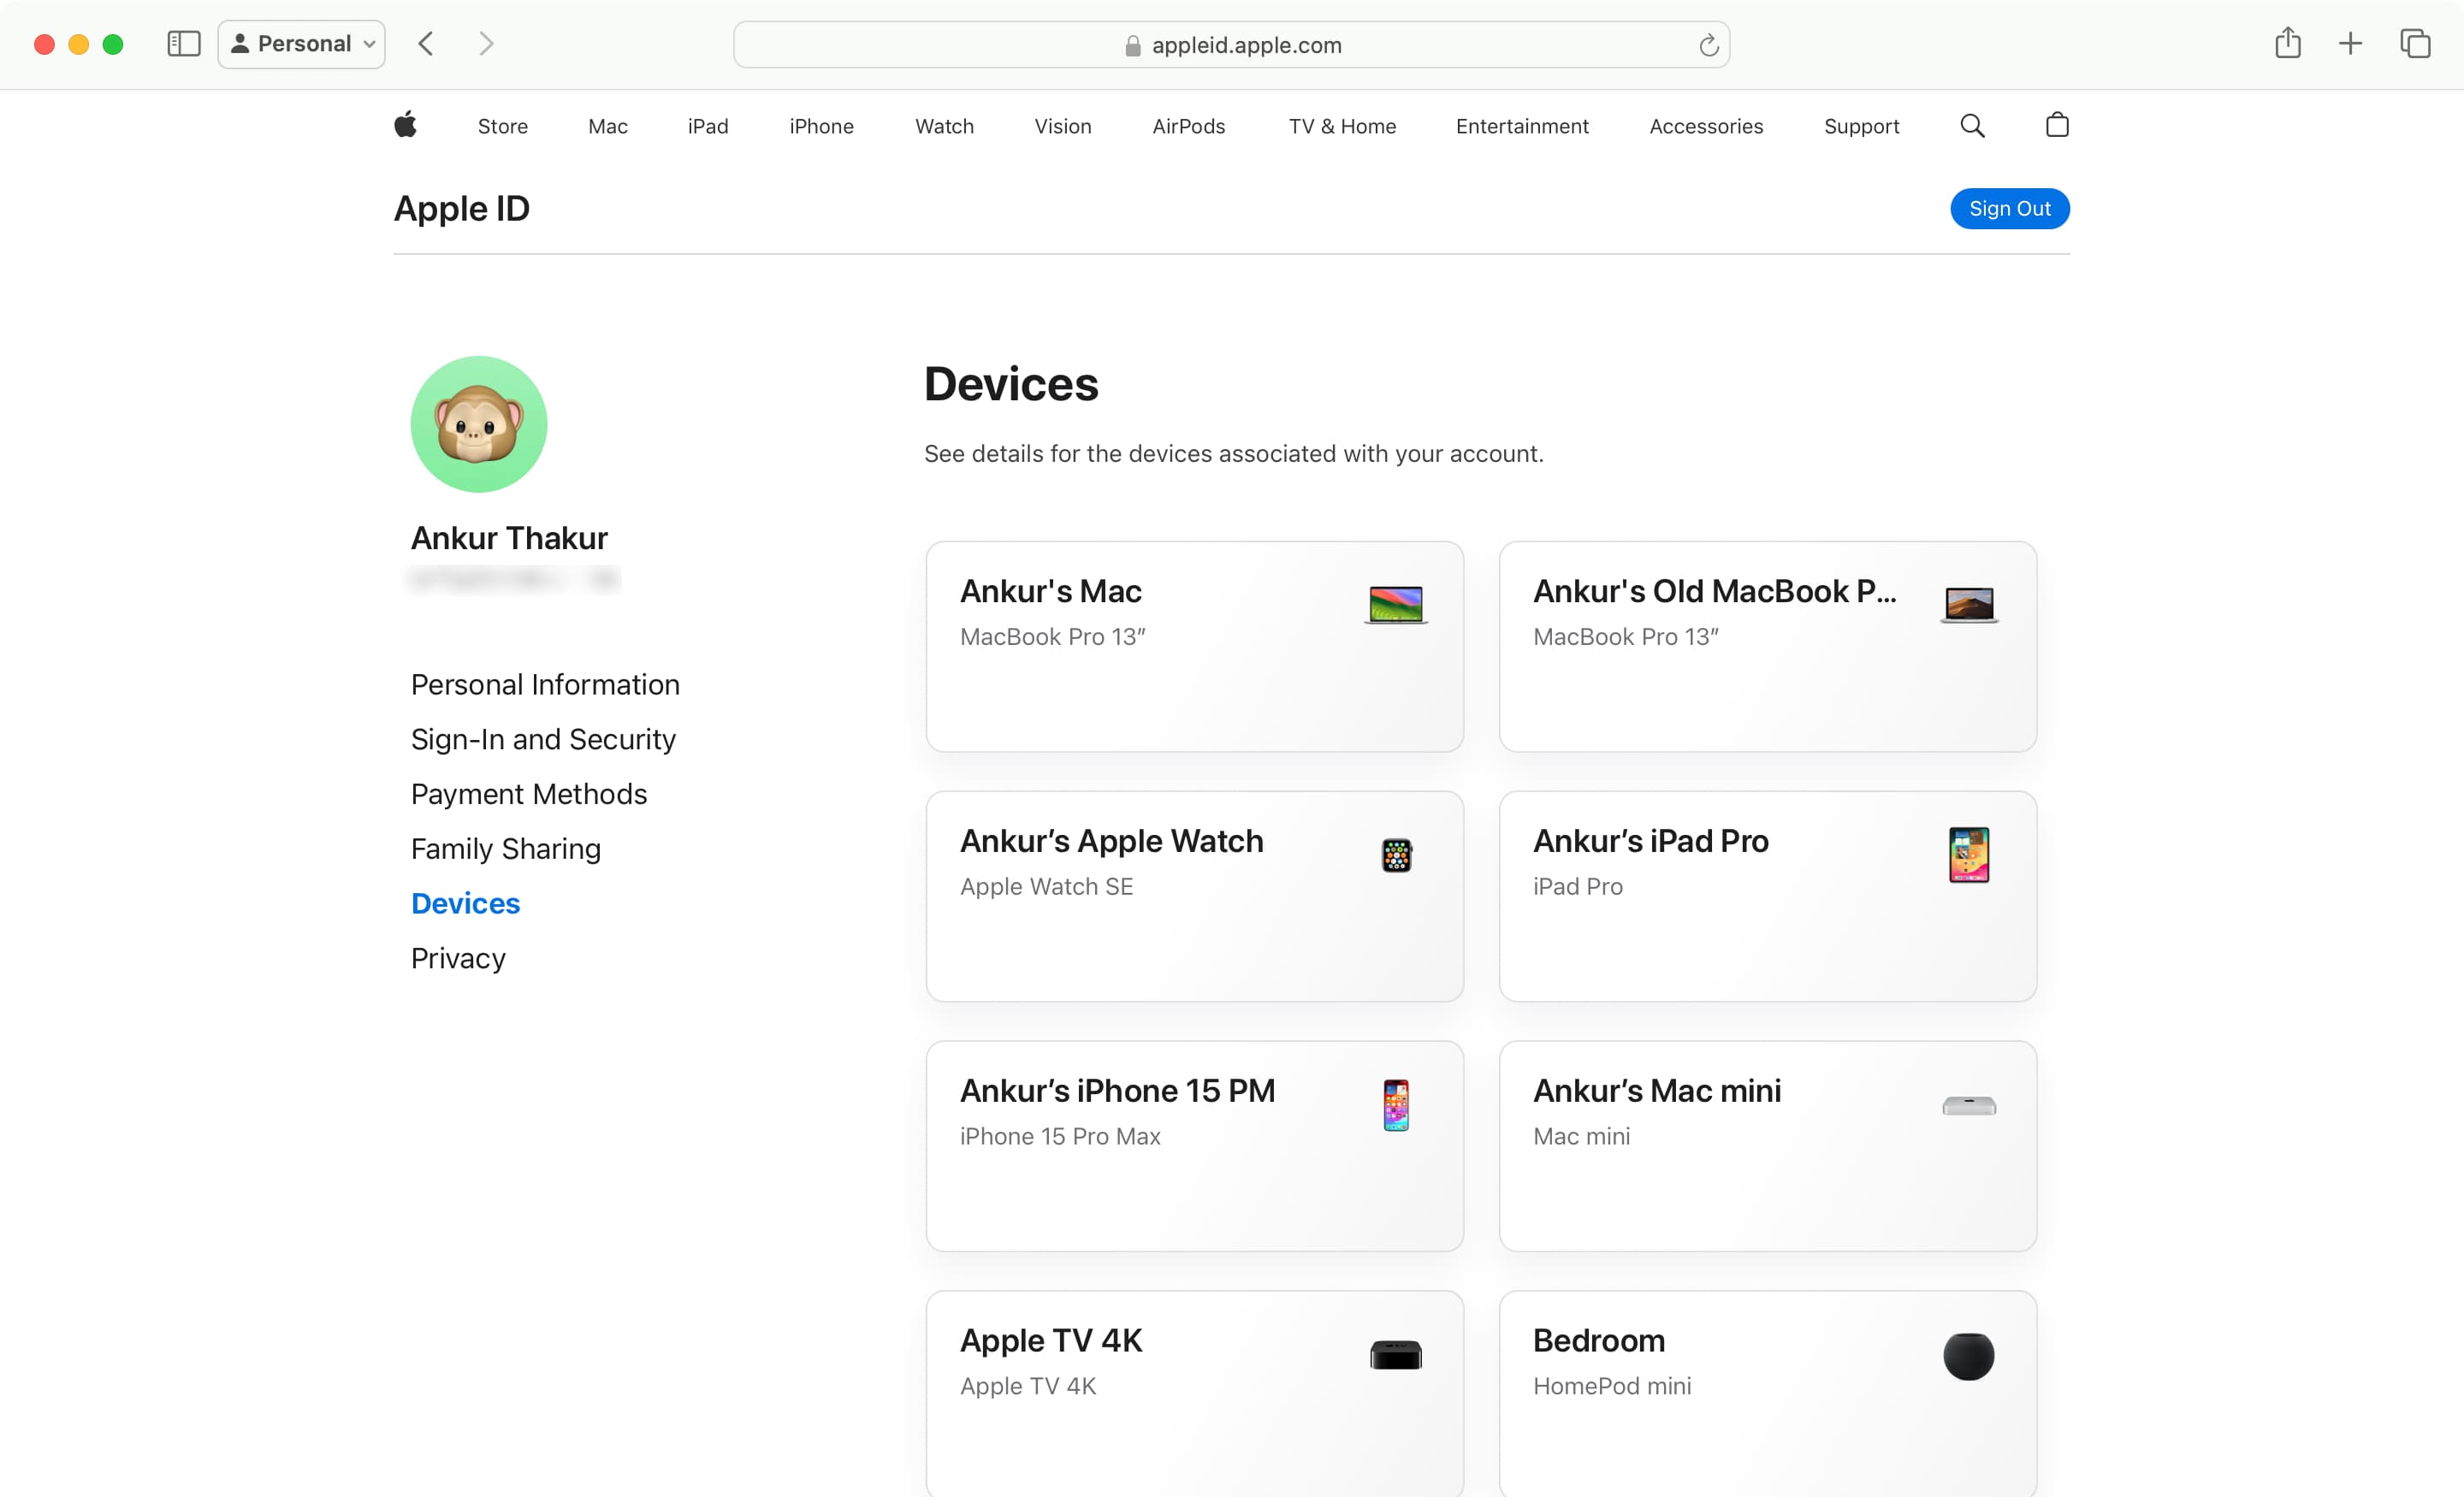 Devices section on Apple ID page